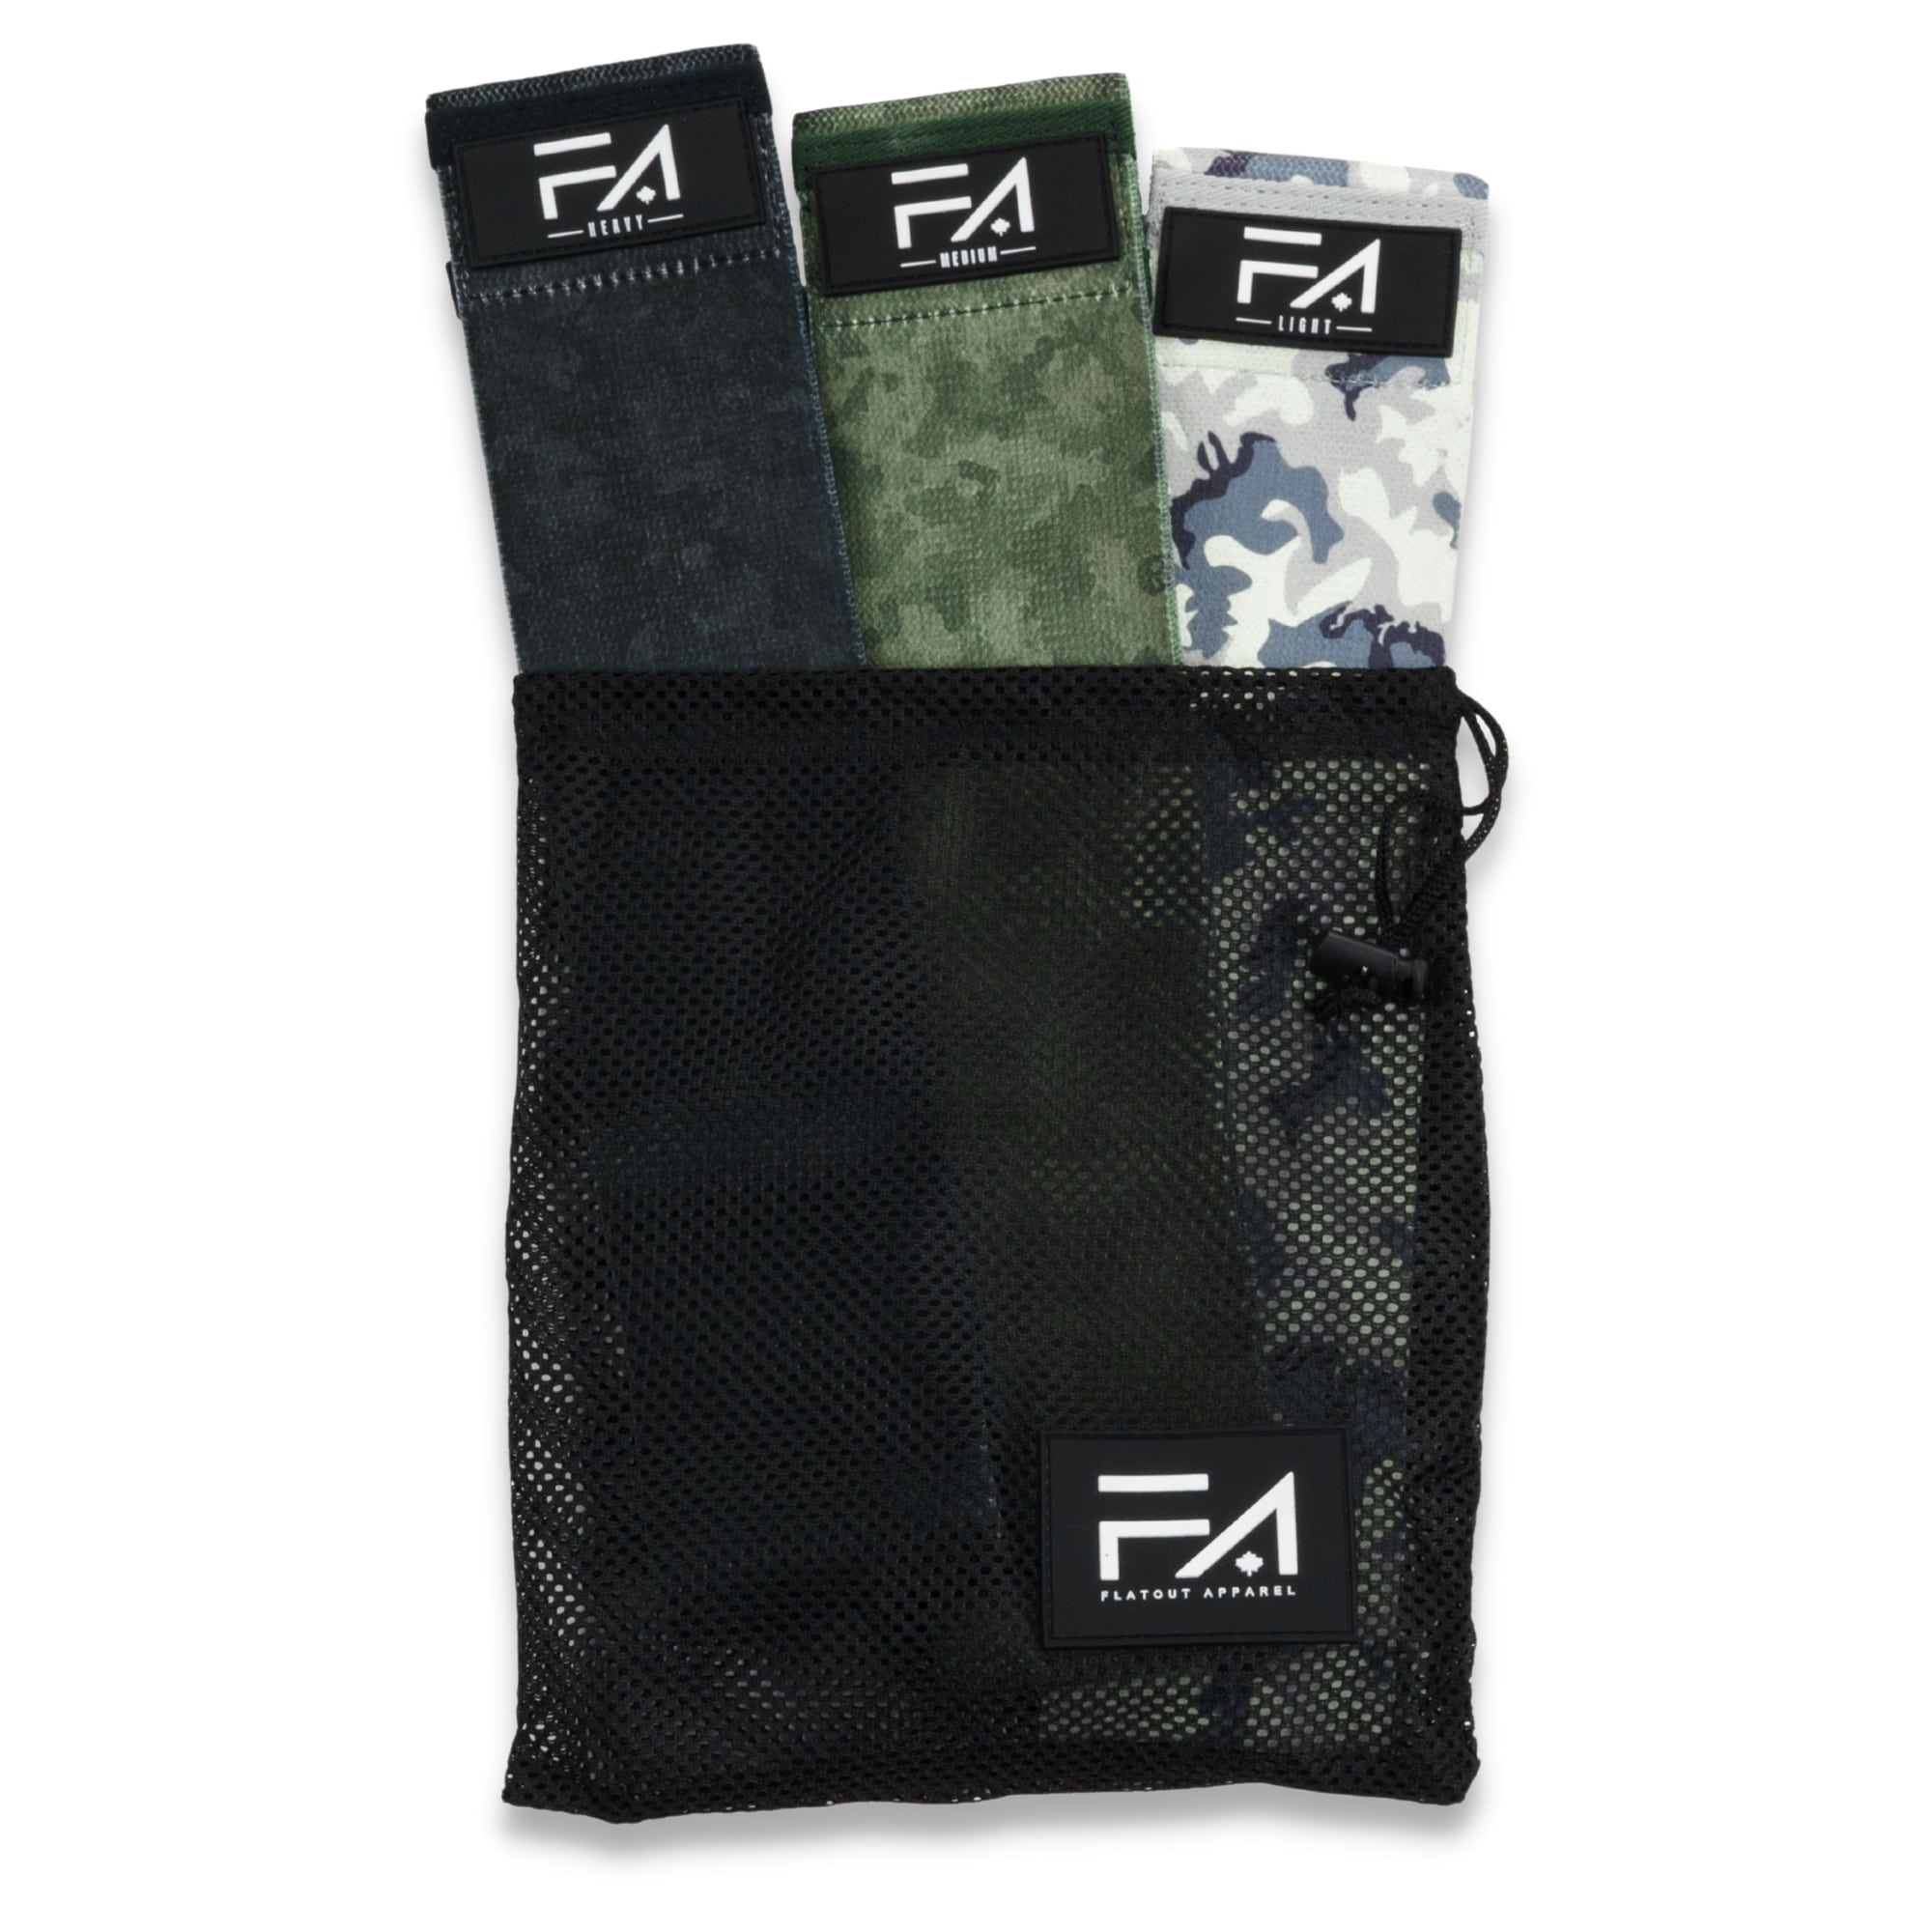 FA Resistance Bands (3 Pack)